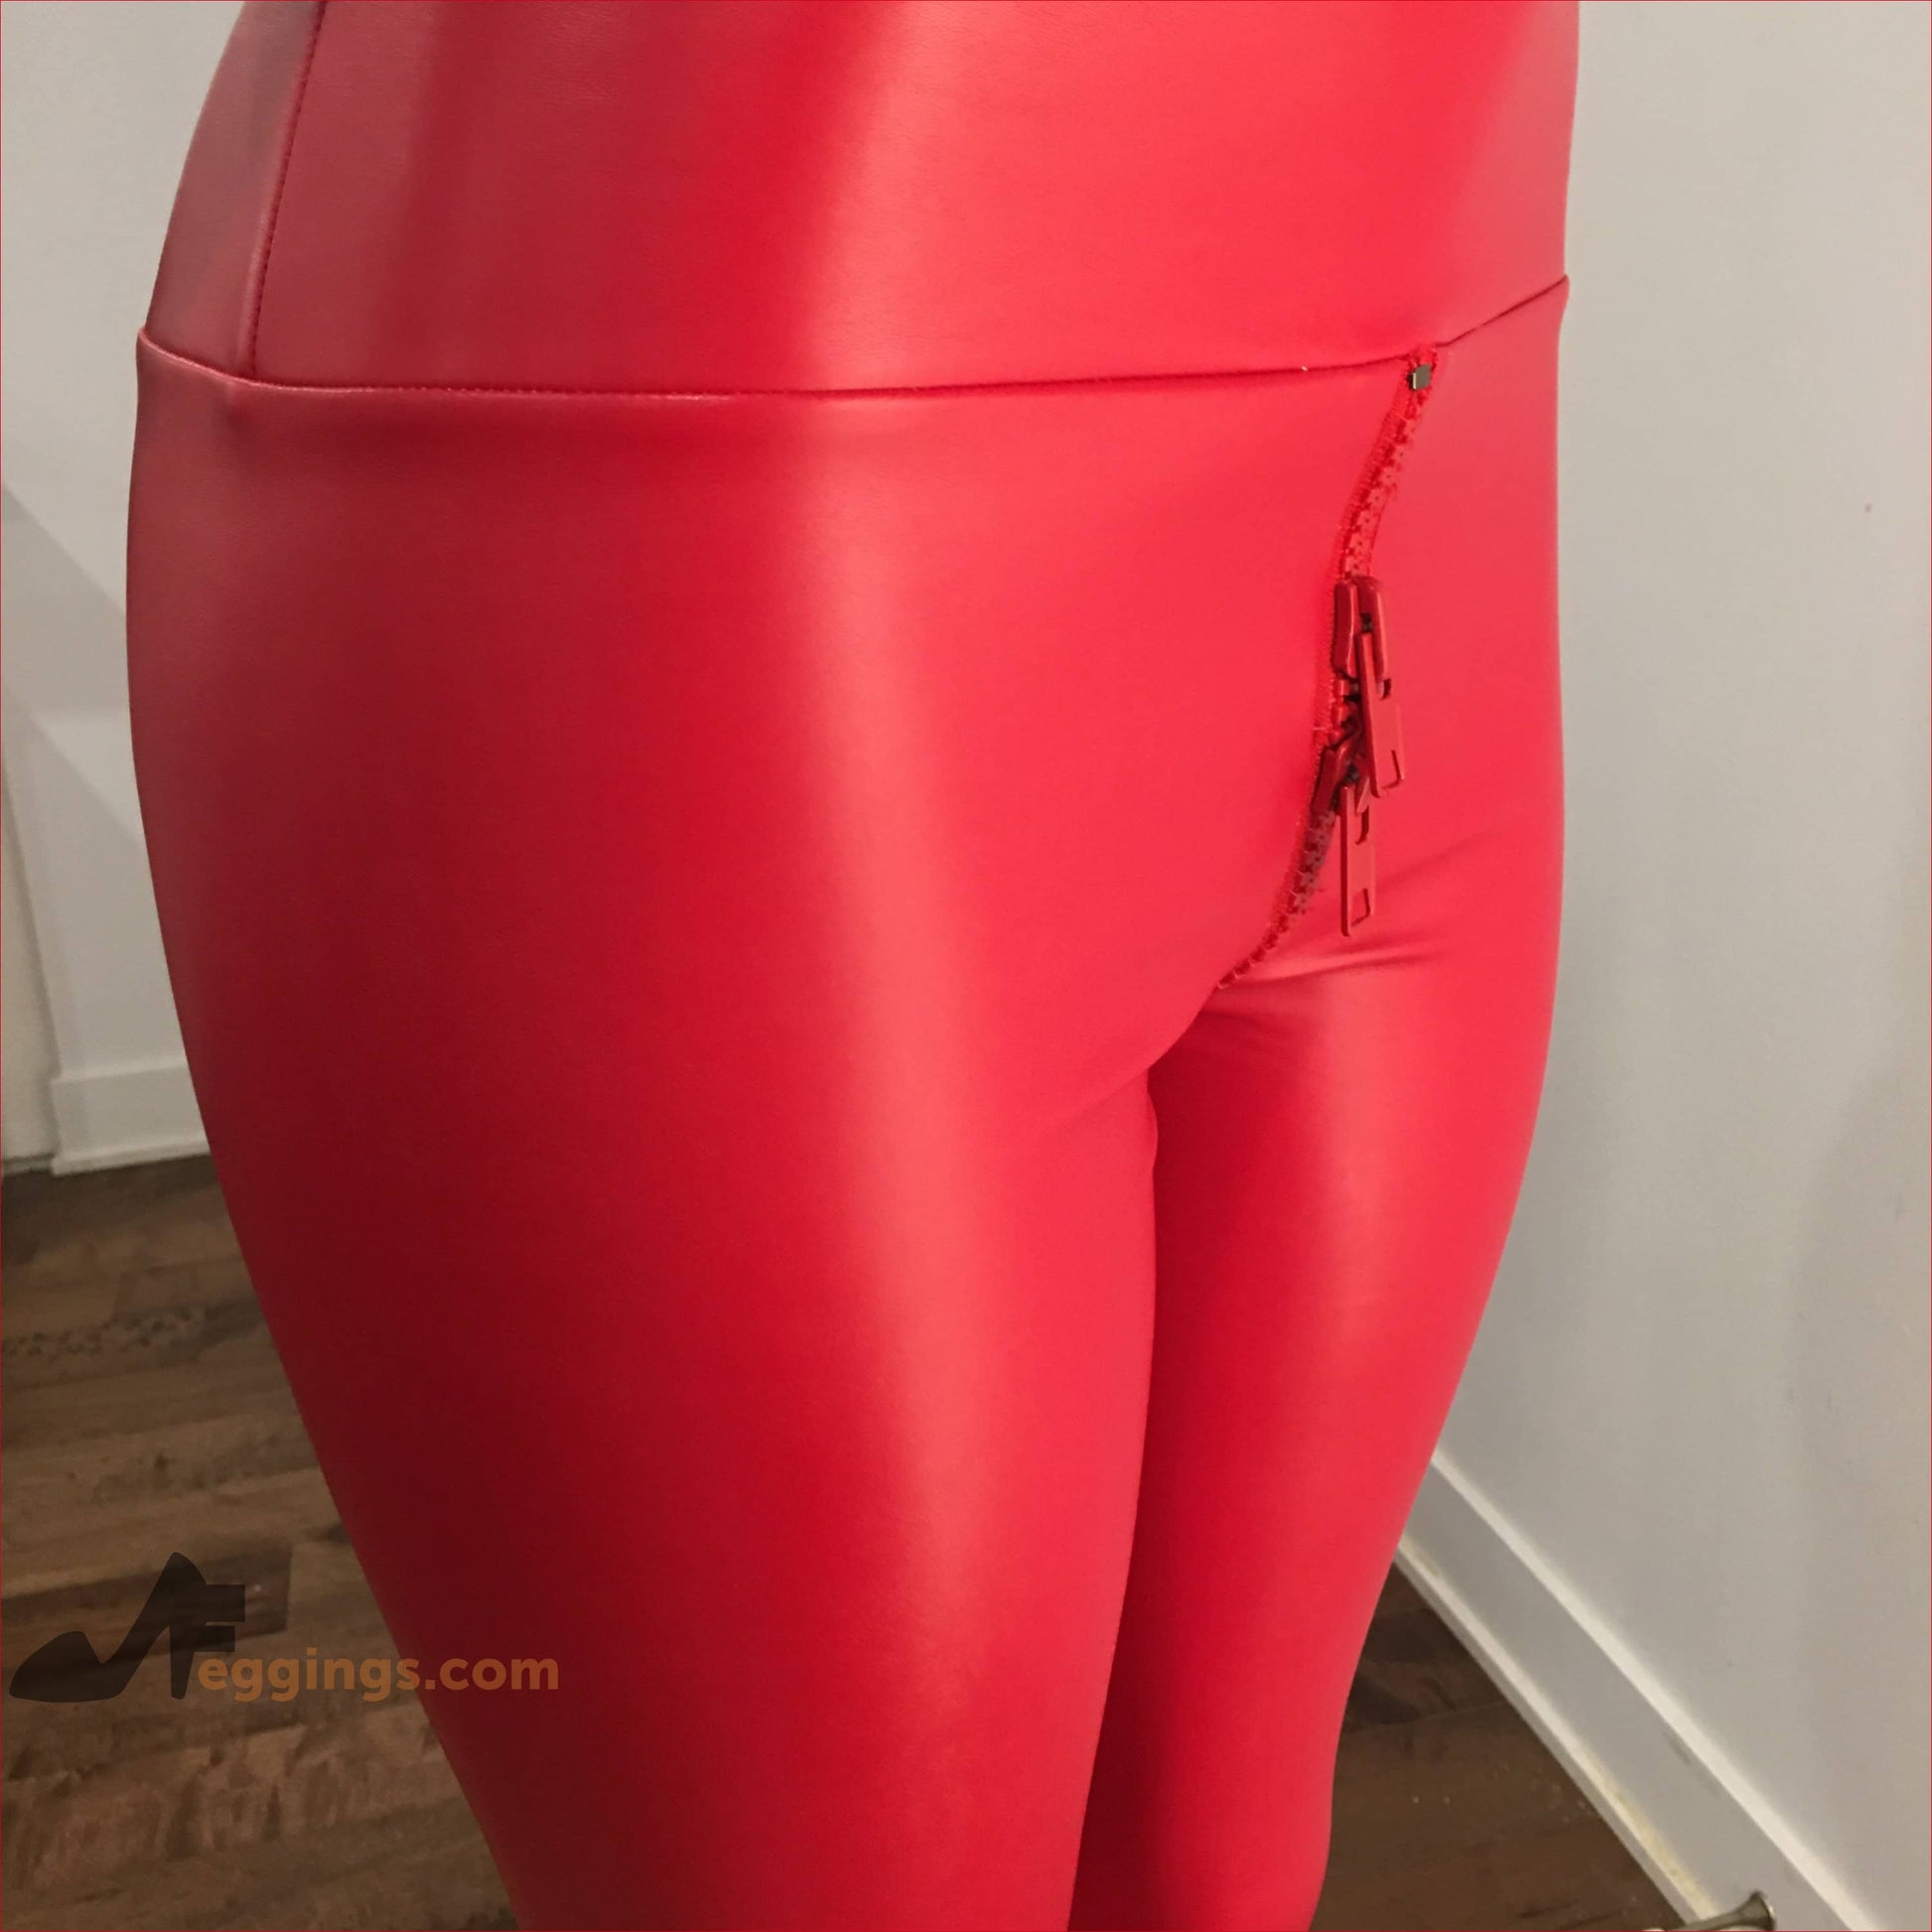 Sexy Leggings Red Leather Crotch Zipper